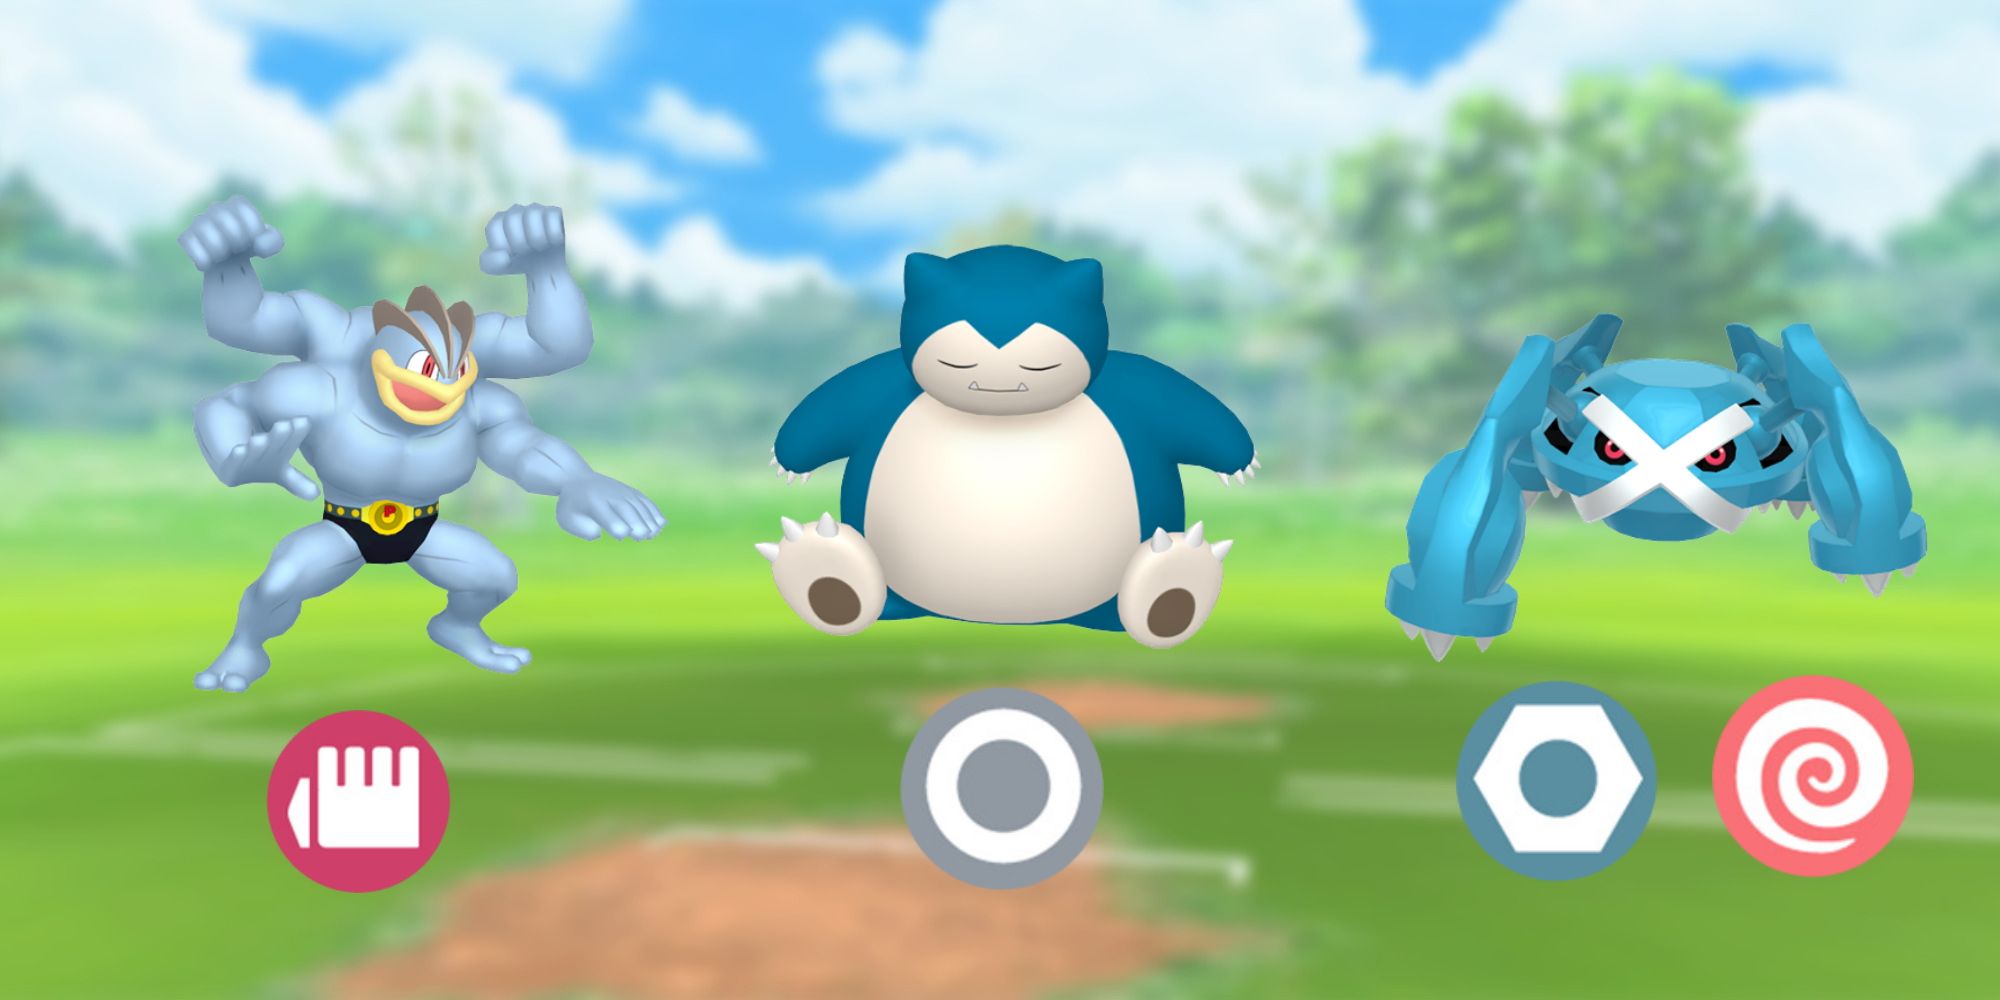 Machamp, Snorlax, and Metagross with their types below them